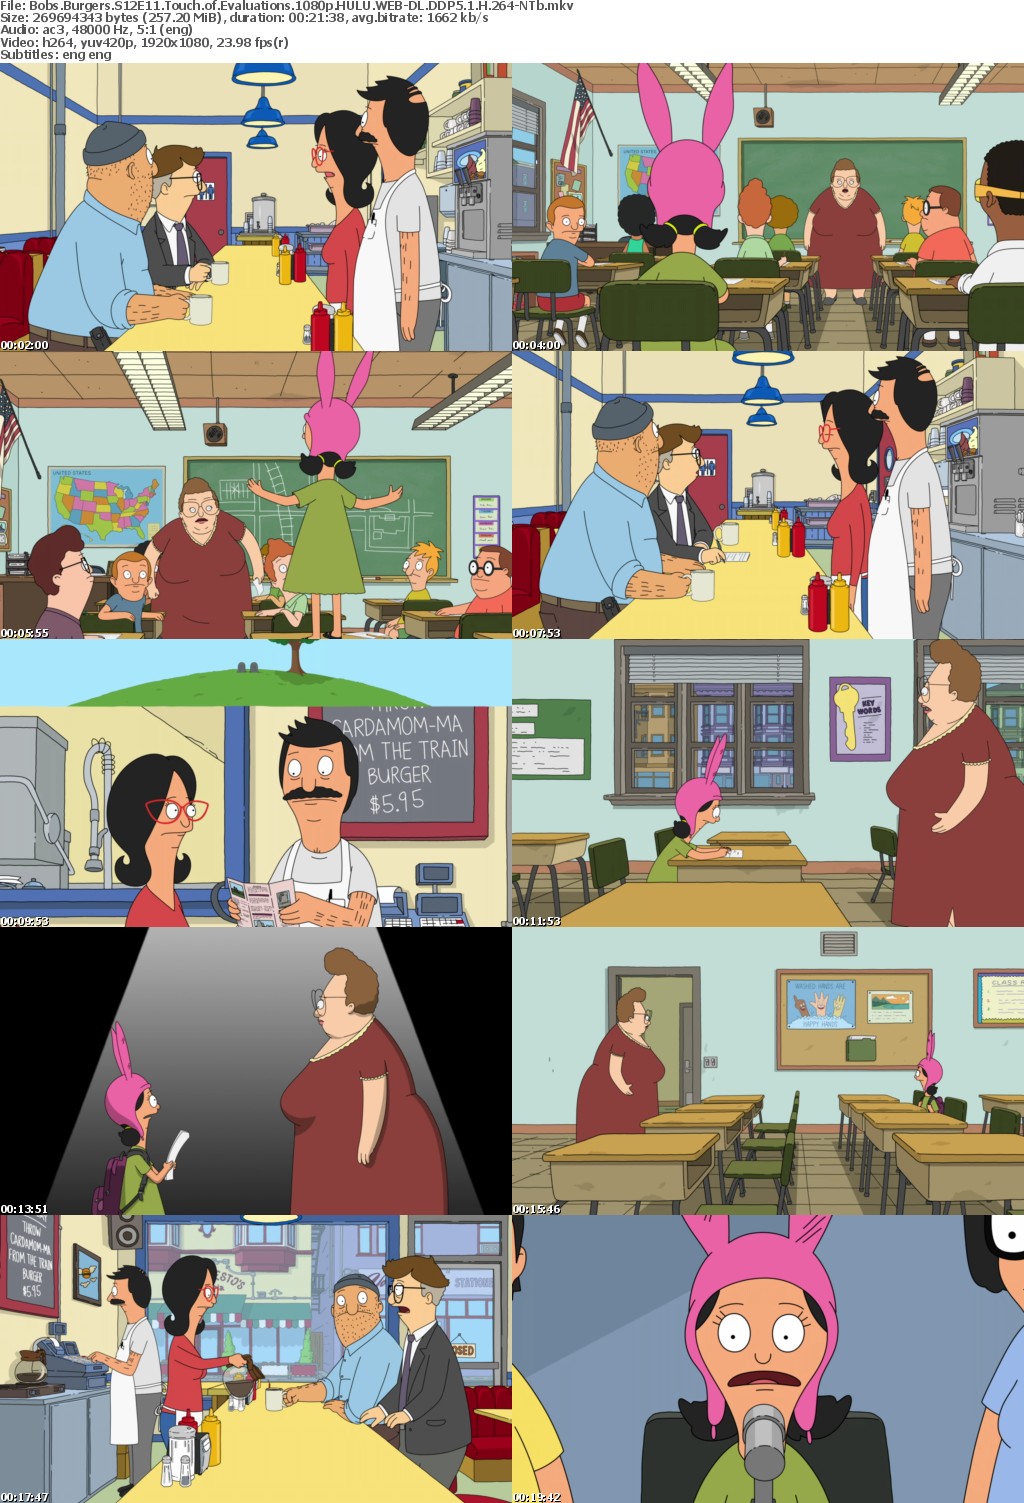 Bobs Burgers S12E11 Touch of Evaluations 1080p HULU WEBRip DDP5 1 x264-NTb